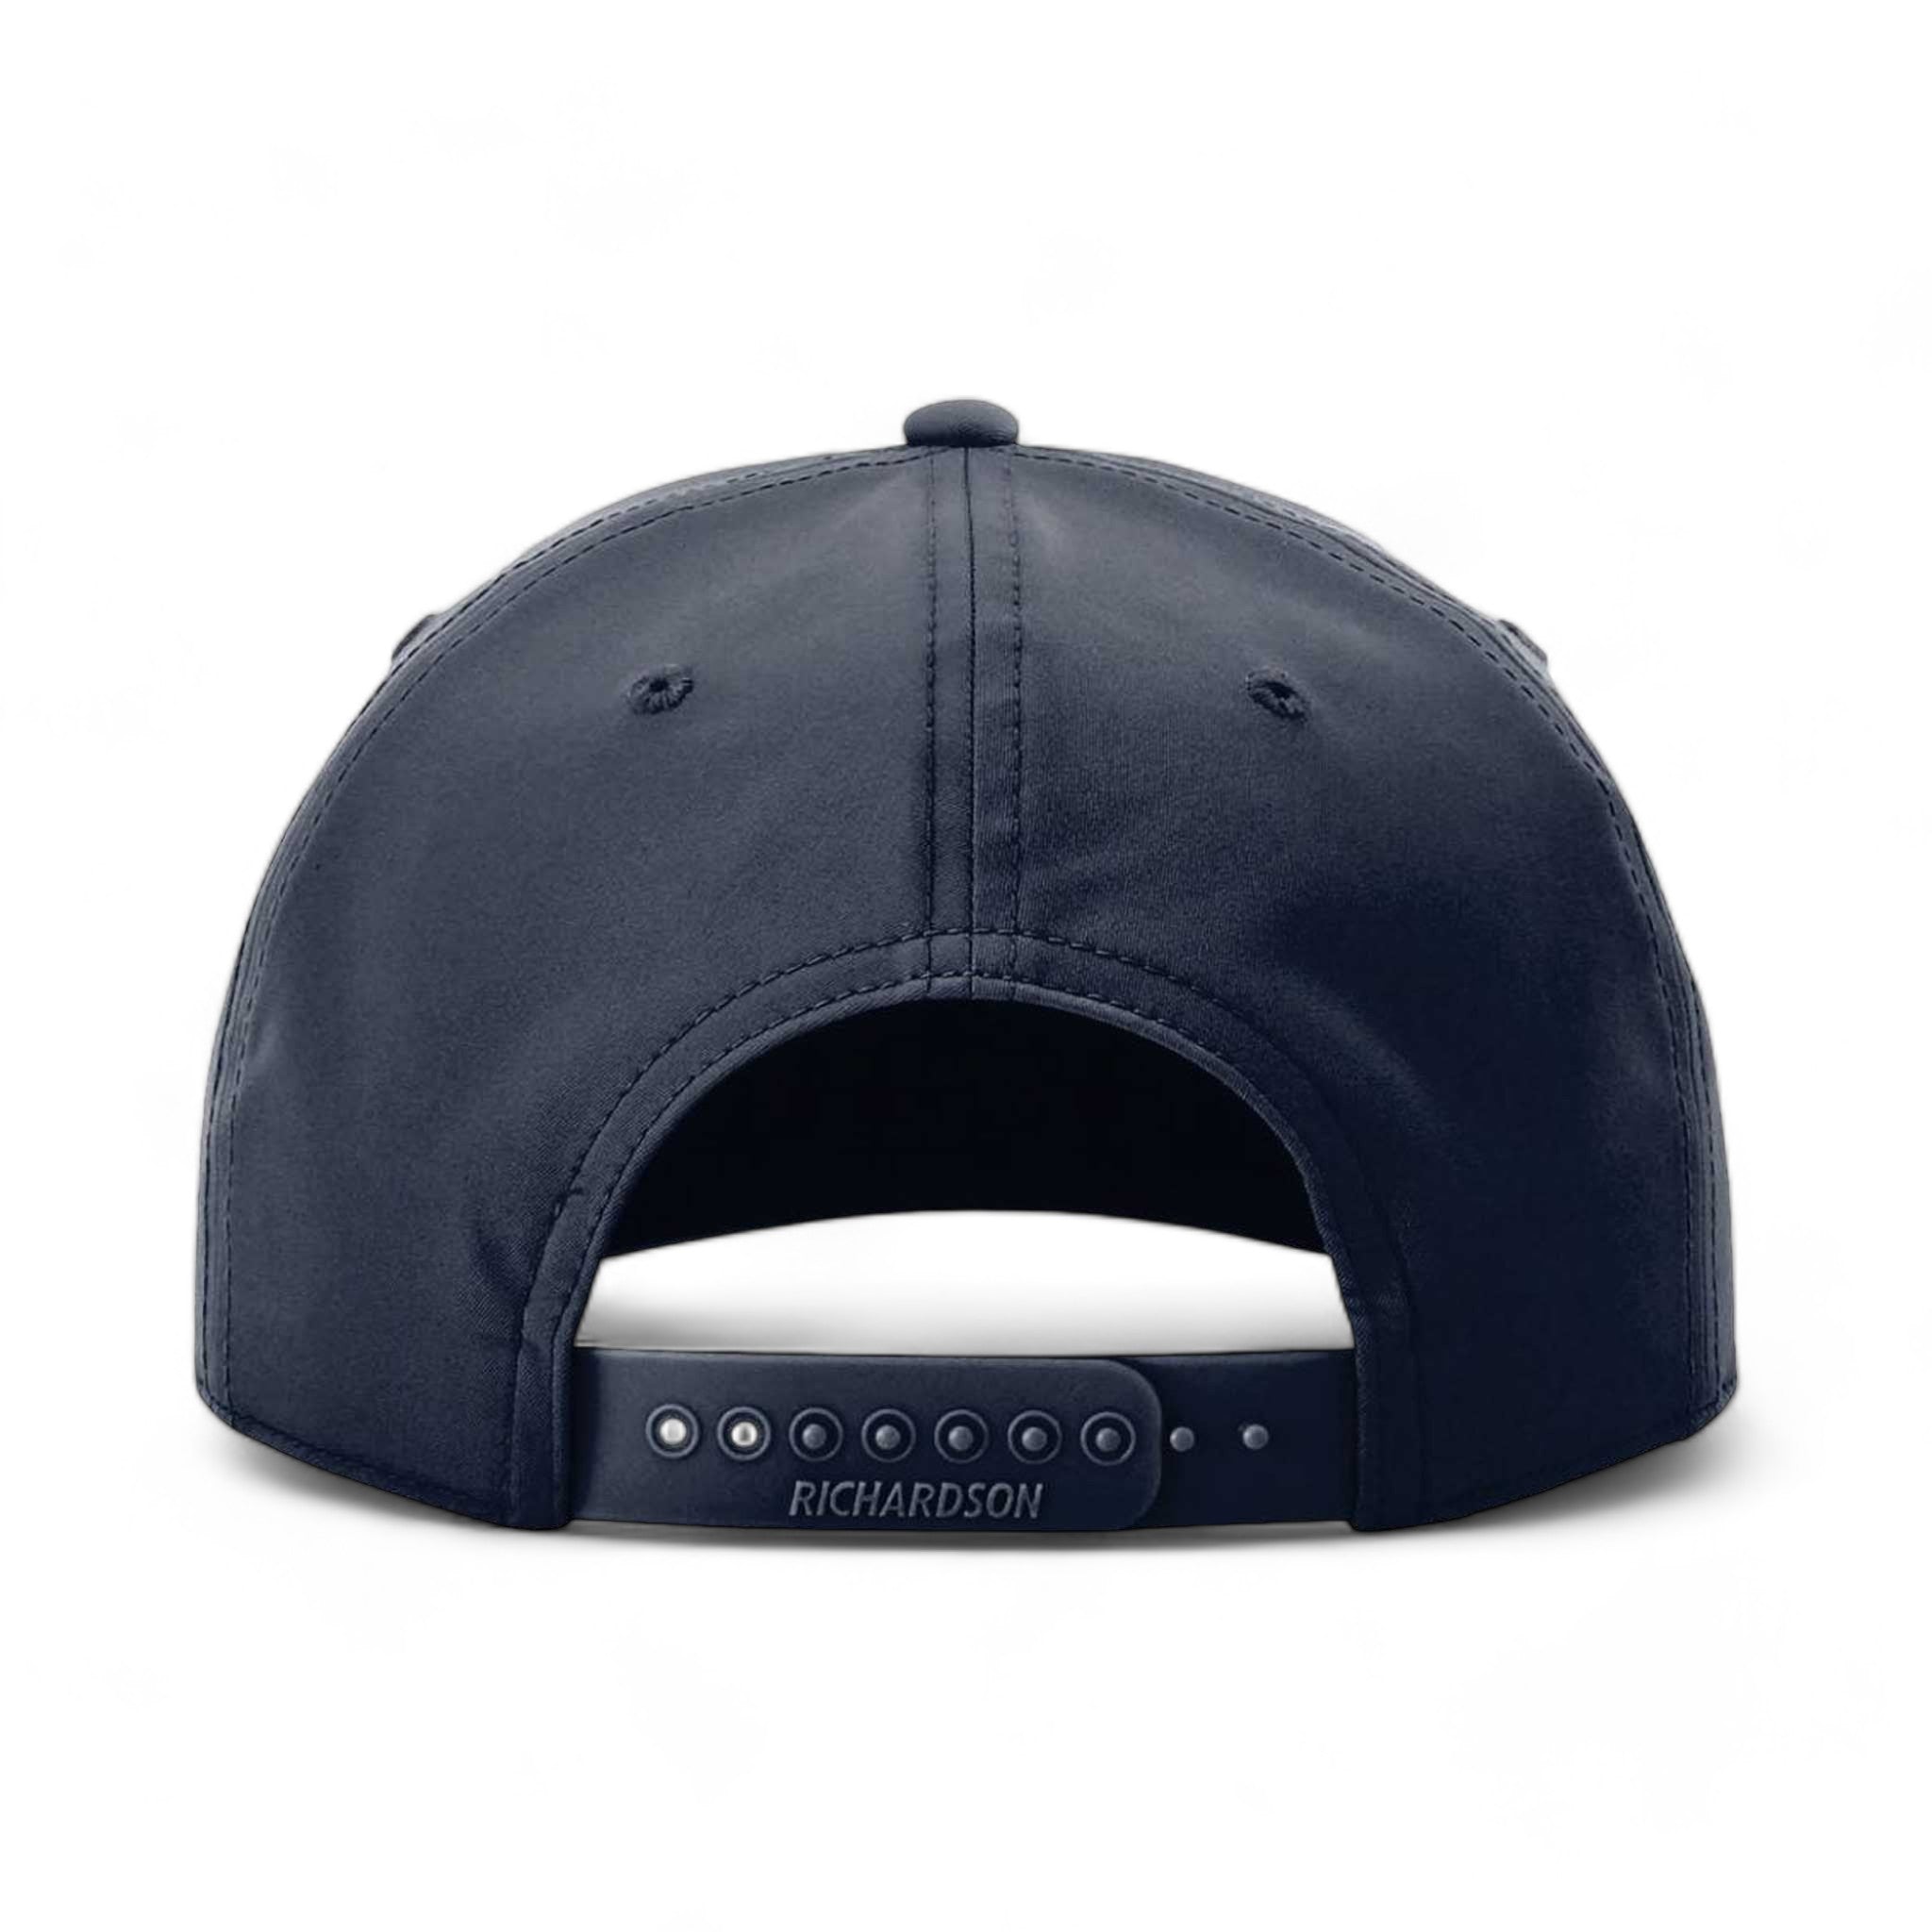 Back view of Richardson 258 custom hat in navy and white